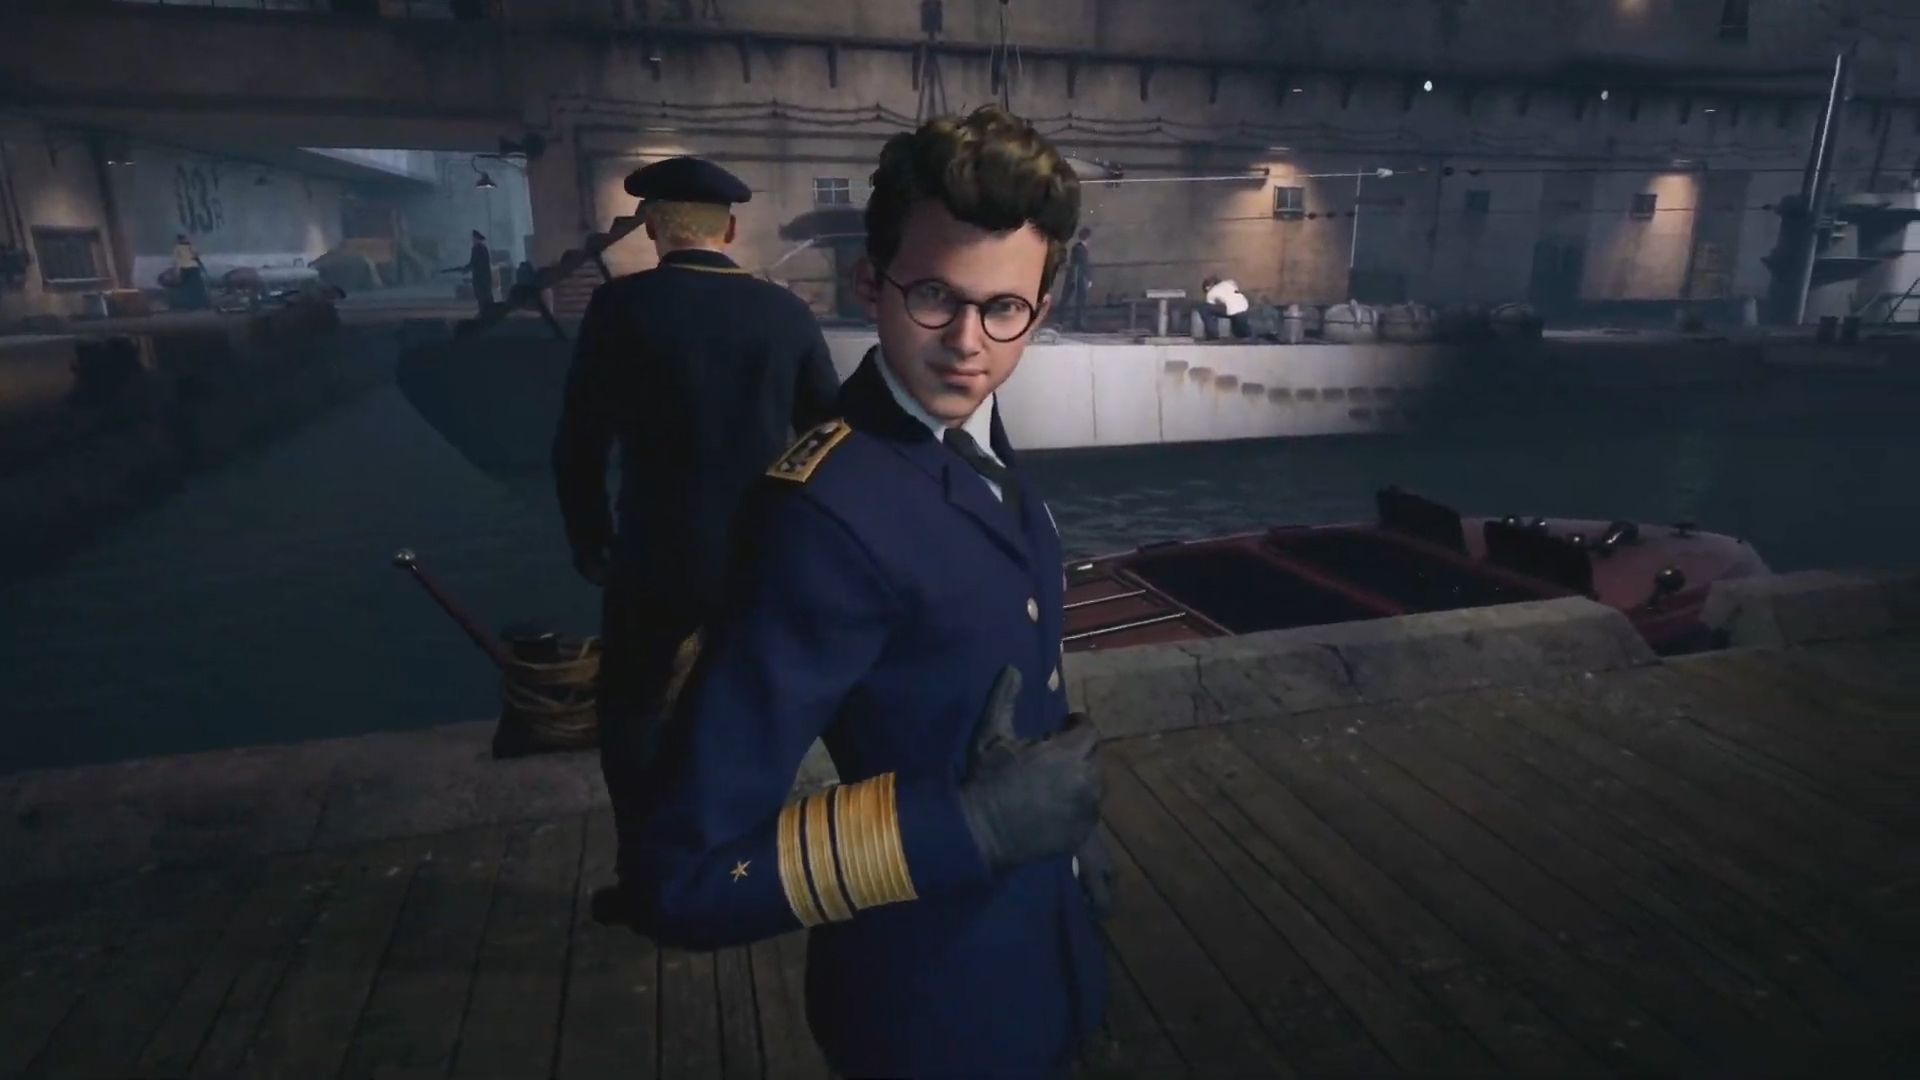 Medal of Honor: Above and Beyond gets a brand new story trailer during Gamescom Opening Night Live